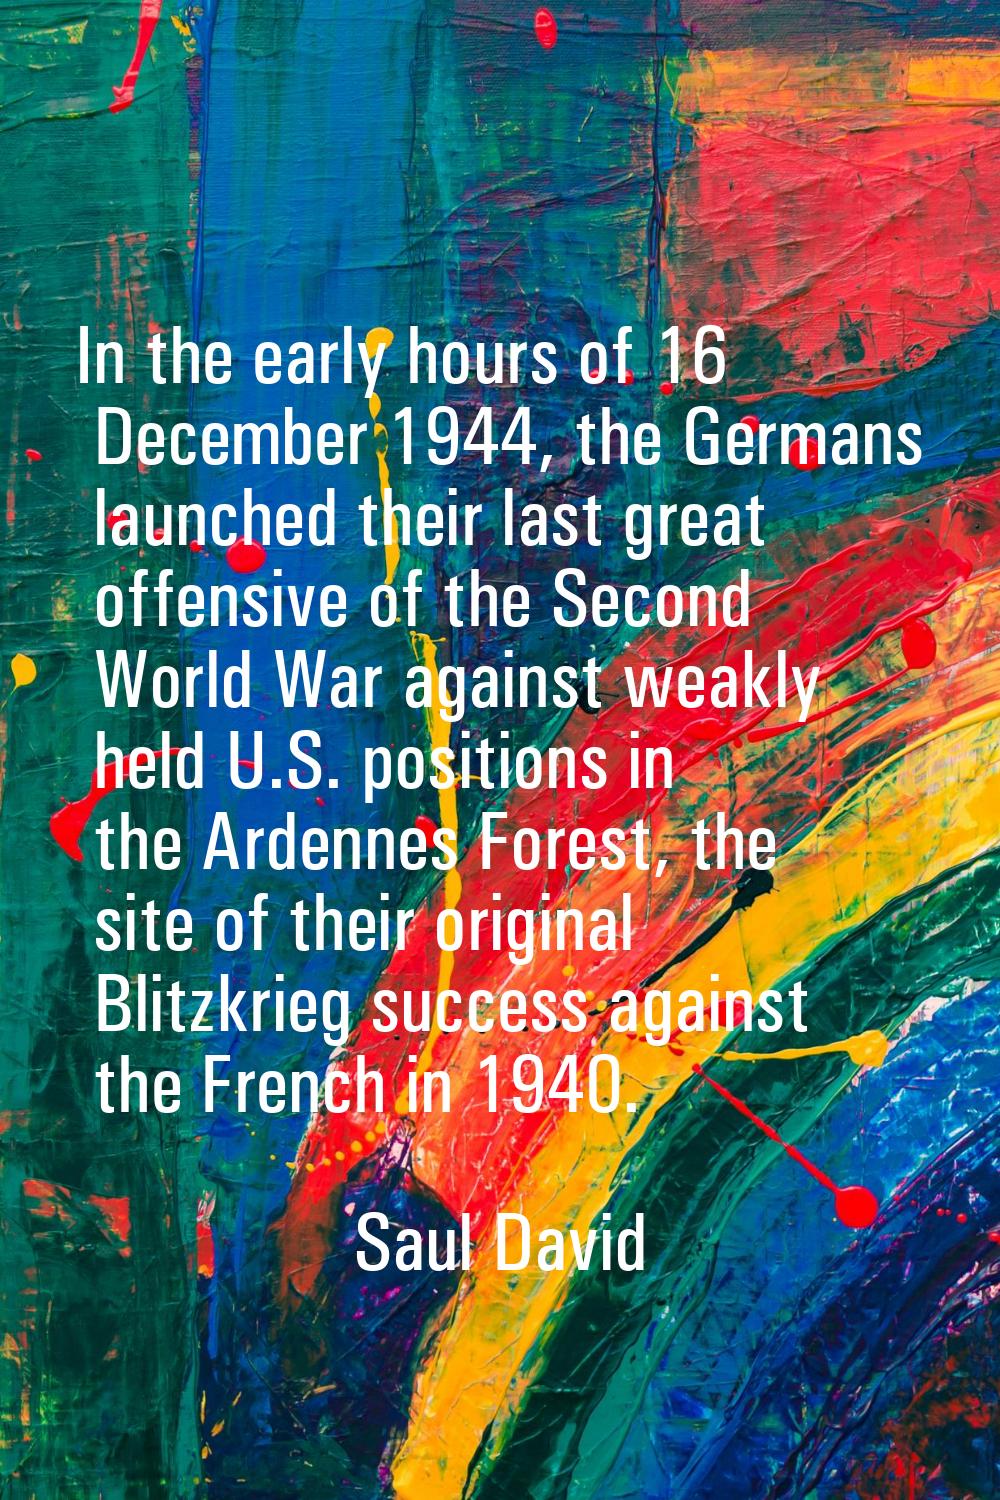 In the early hours of 16 December 1944, the Germans launched their last great offensive of the Seco